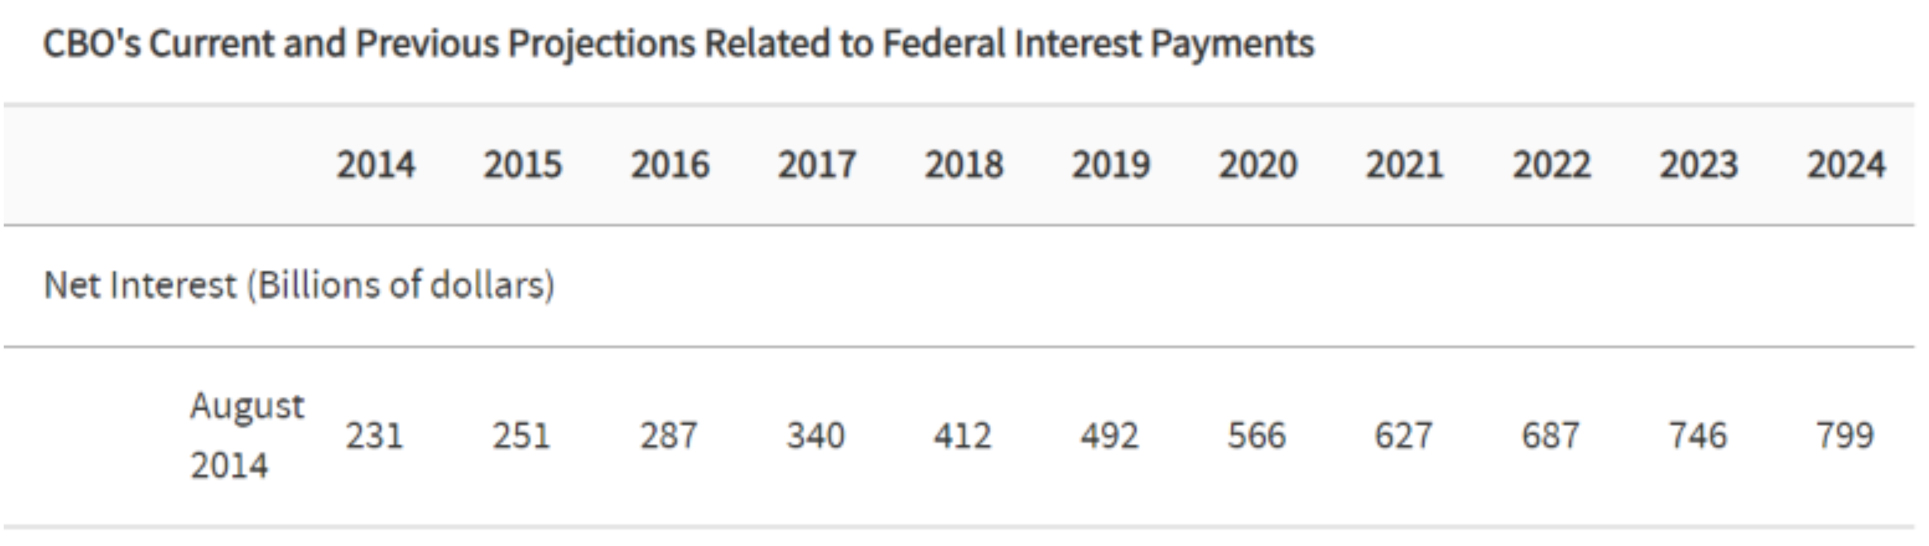 Federal Interest Payment Projections Table